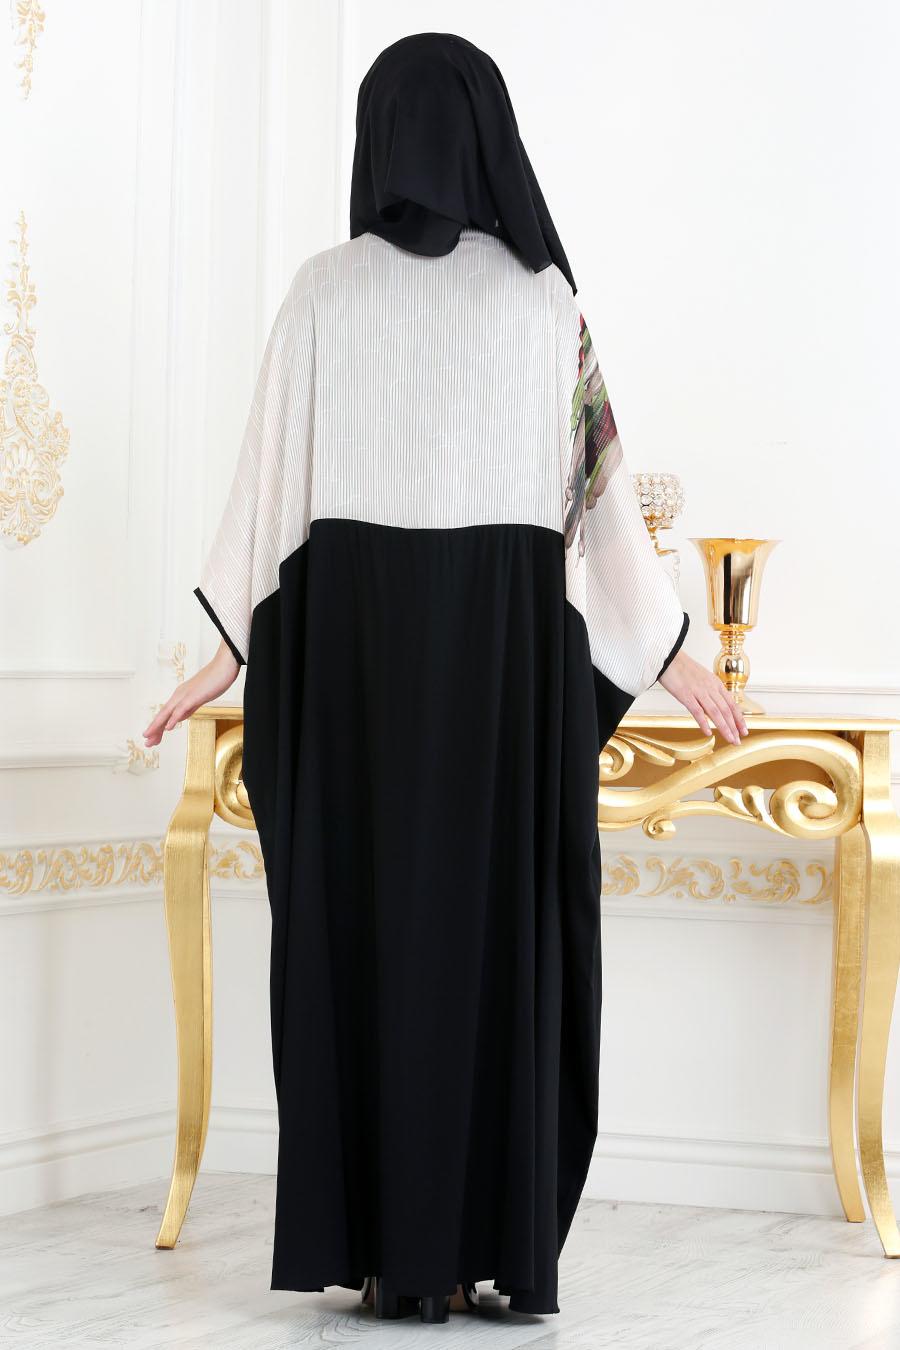  Rose  Poudr  Nayla Collection Abaya  Turque 1484PD 